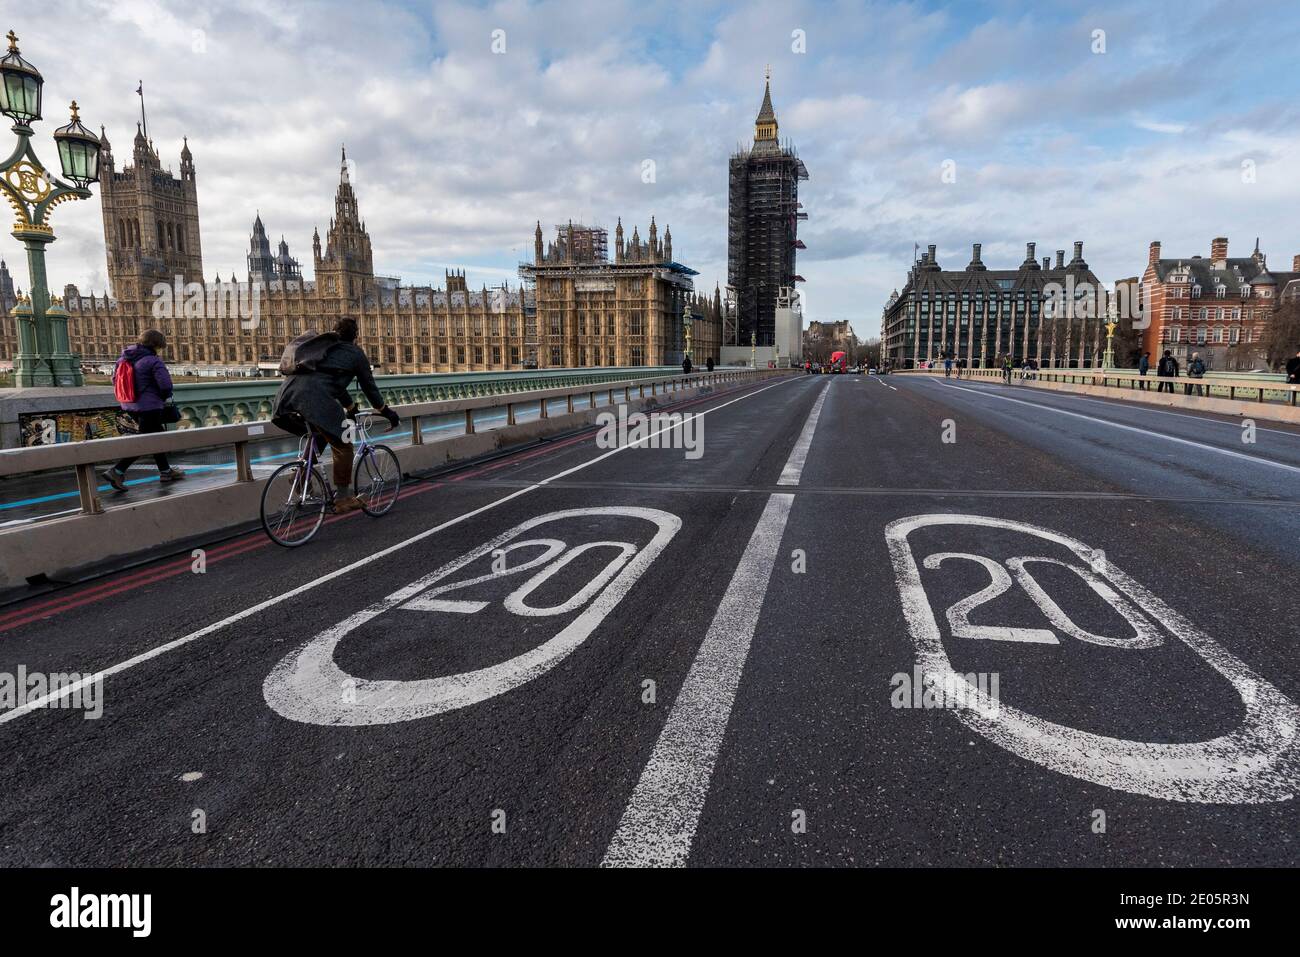 London, UK.  30 December 2020. The Houses of Parliament stand behind a pair of 20 miles per hour speed limit signs on the road on Westminster Bridge which, together, show the year 2020.  As 2020 draws to a close, MPs are due to ratify the UK/EU trade deal in Parliament today.  At the same time, the UK government is trying to tackle the effects of the record levels of coronavirus cases which may require an increase in national tier alert levels.  Credit: Stephen Chung / Alamy Live News Stock Photo